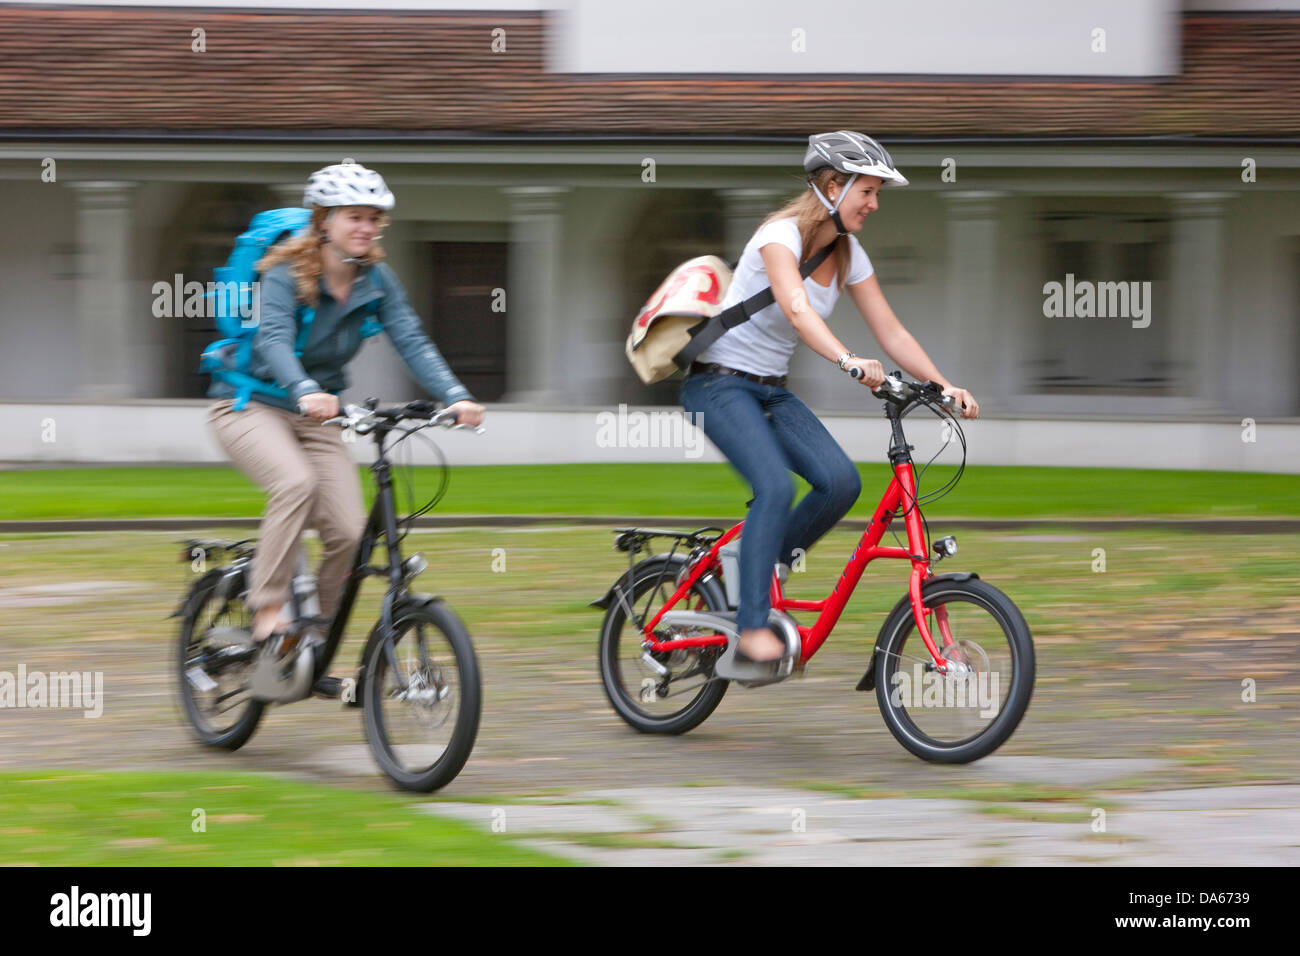 Students, electric bicycle, Flyer, eBike, bicycle, bicycles, bike, riding a bicycle, Switzerland, Europe, women, bicycle, bike, Stock Photo